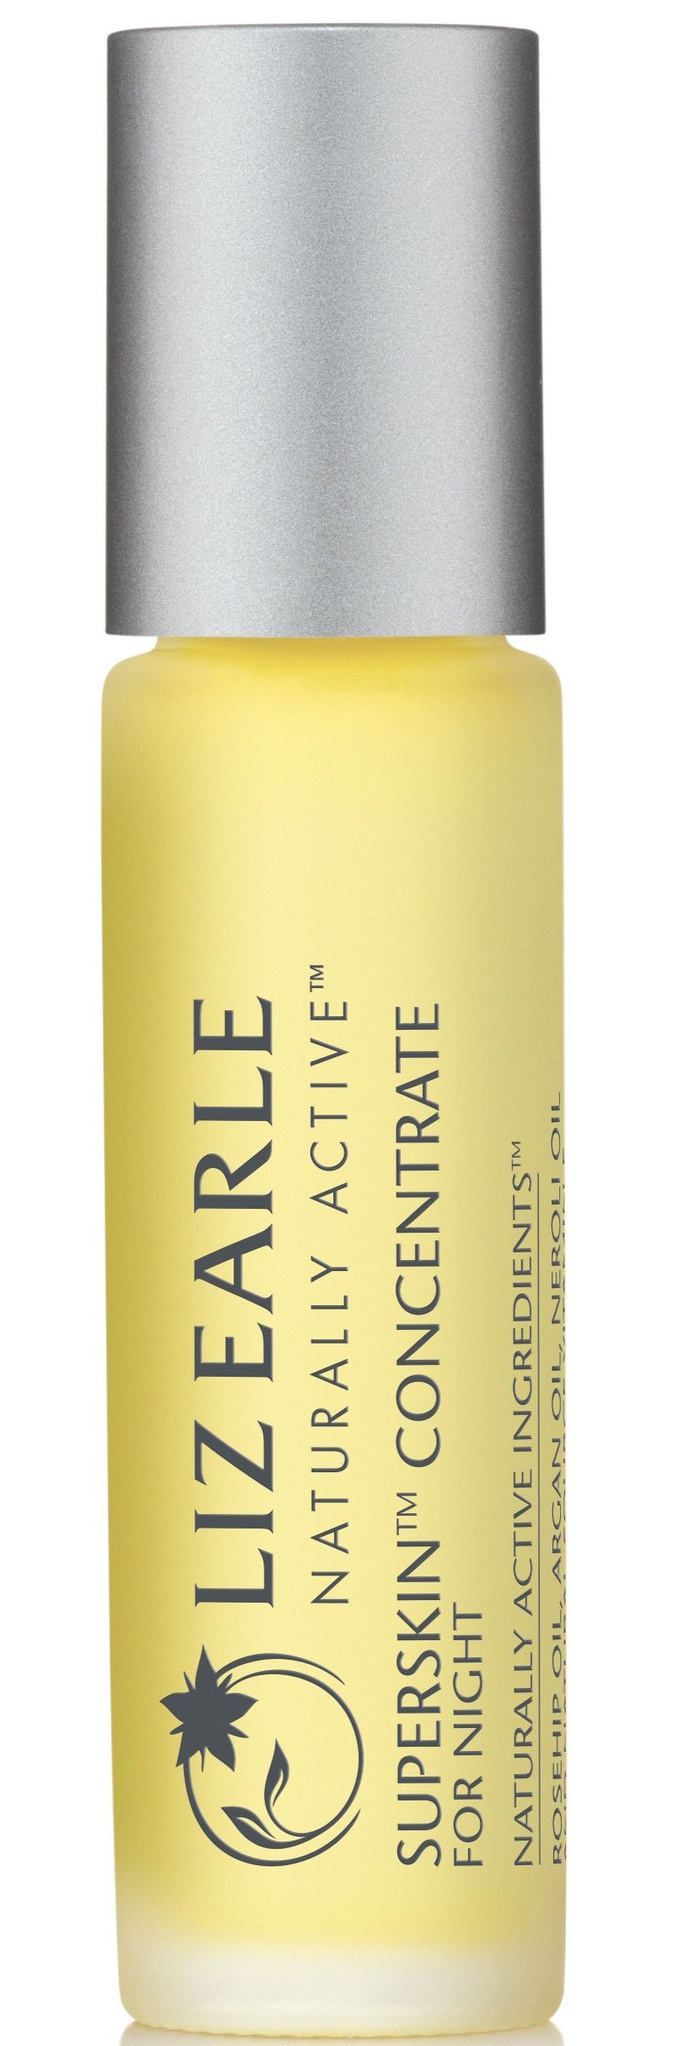 Liz Earle Superskin Concentrate For Night